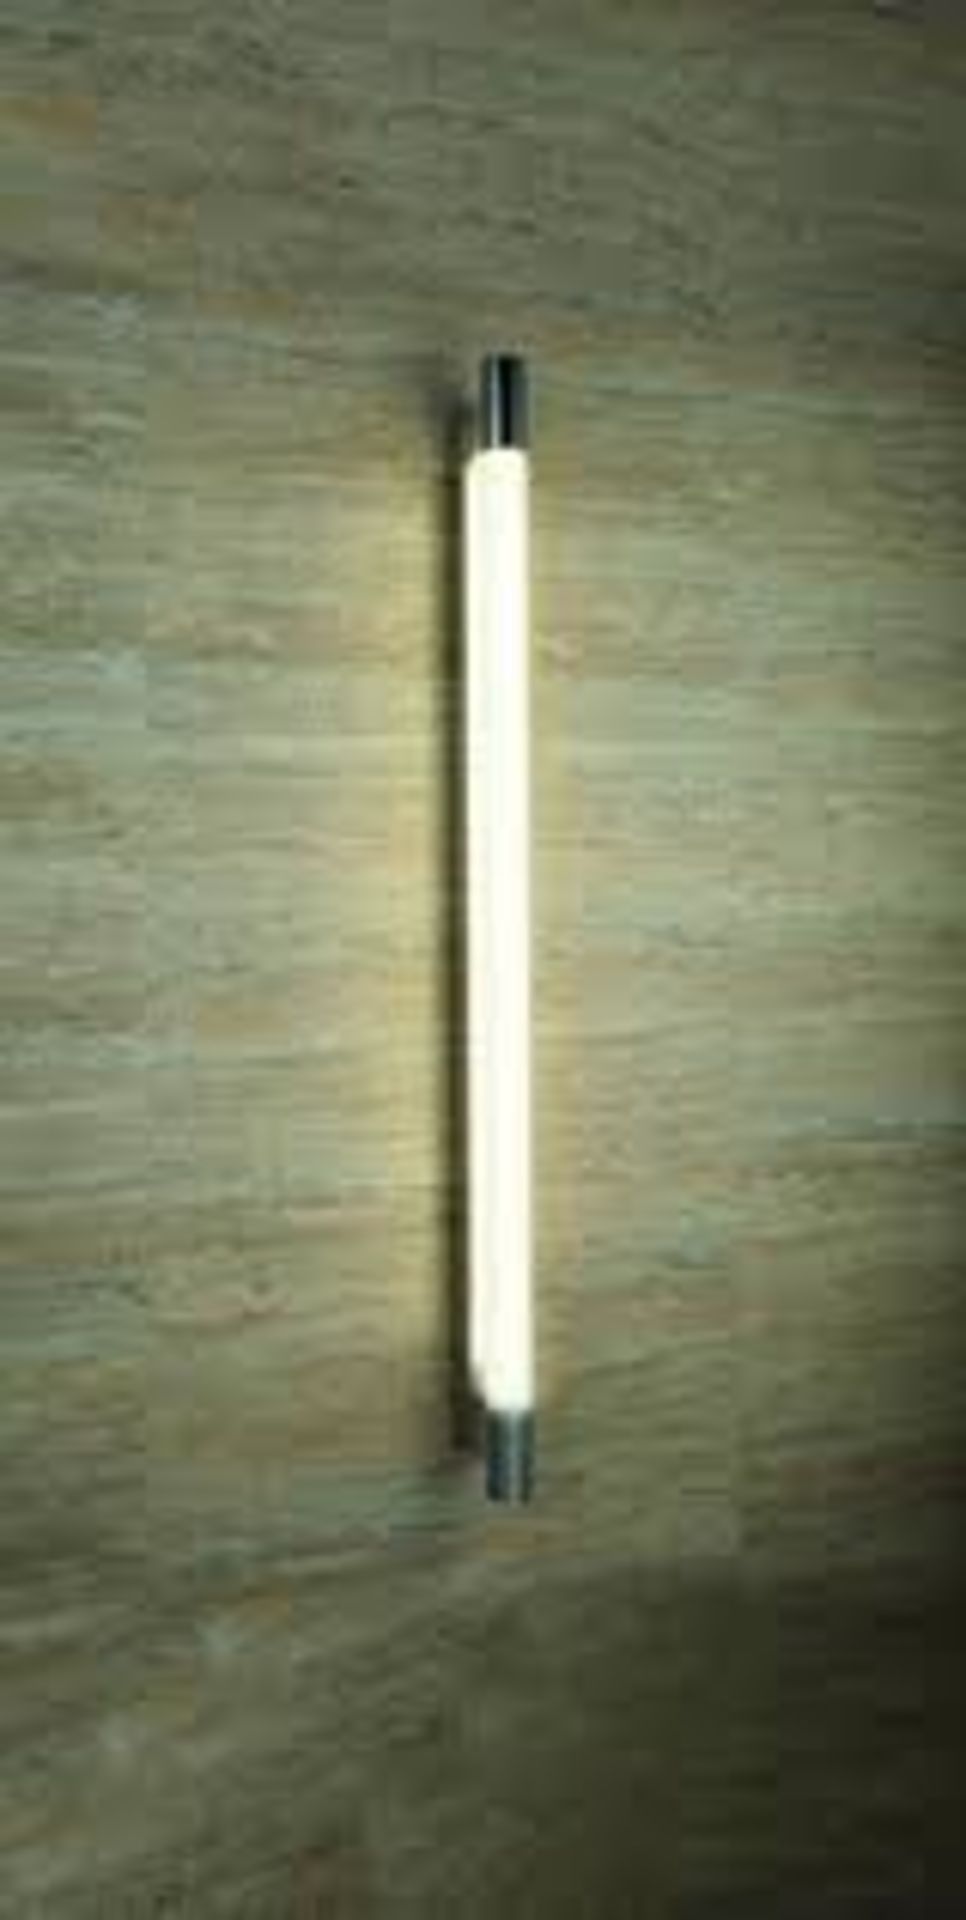 1 x Searchlight Bathroom Light Fitting - Poplar 100cm Wall Light With T5Tube, Frosted Glass Shade,